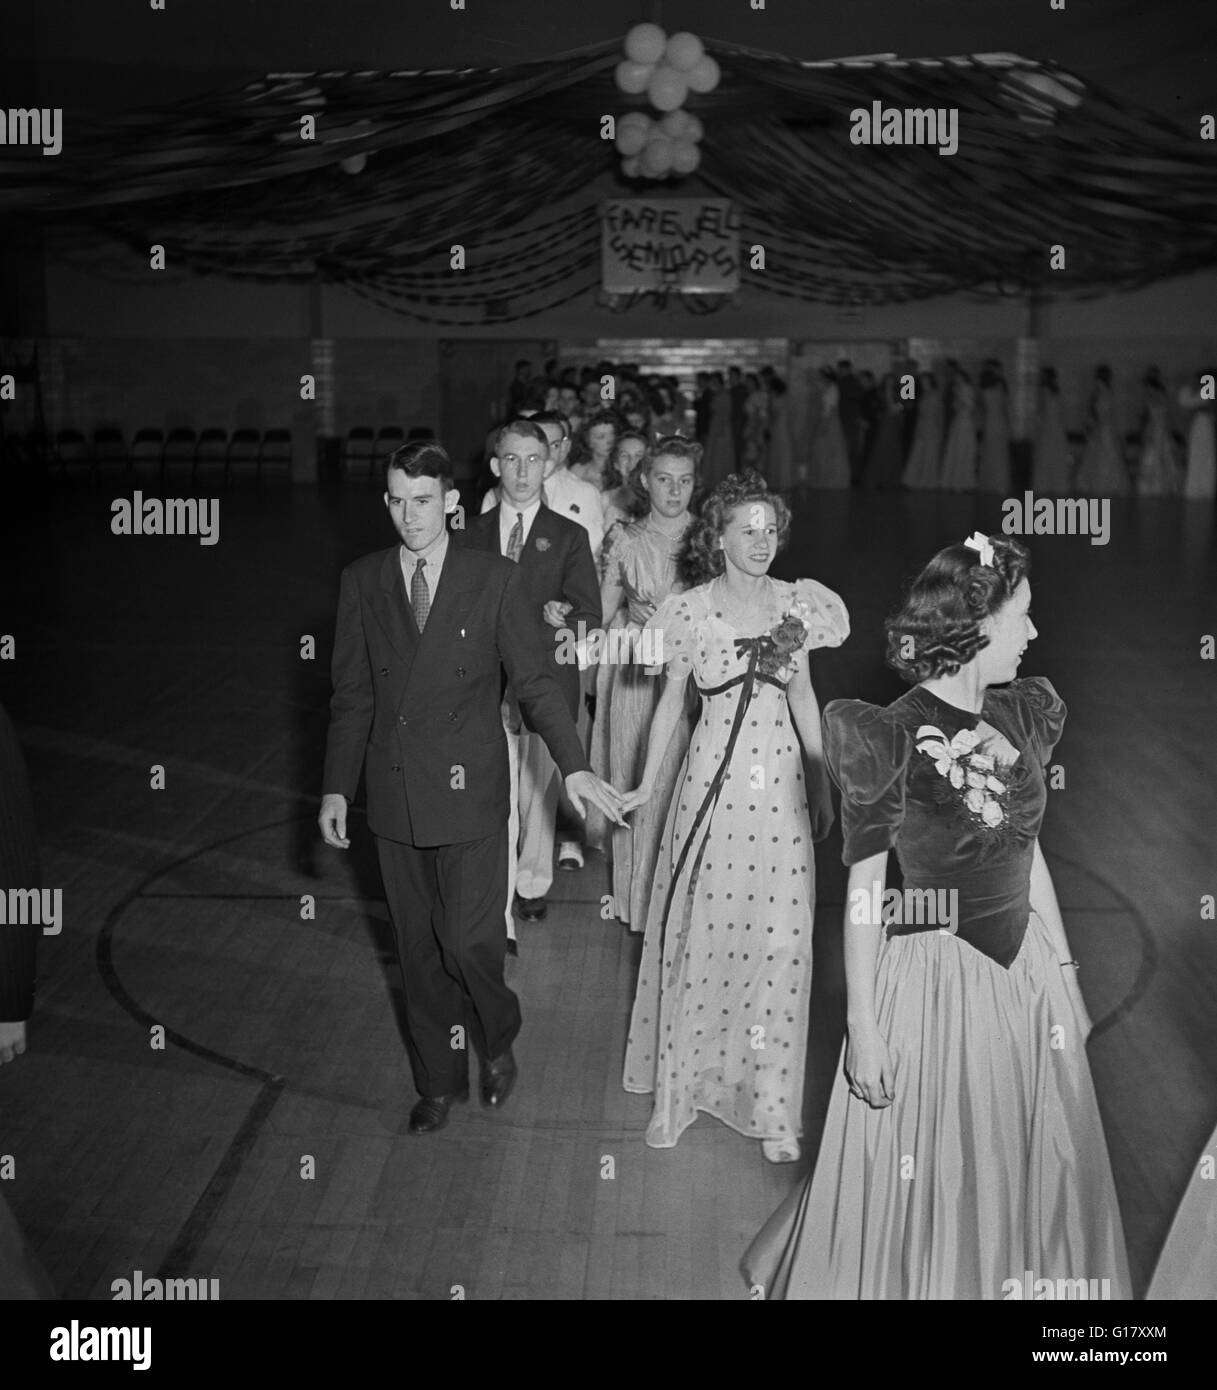 Grand March at Senior Prom Held in Gymnasium of Elementary School in Federal Housing Project, Greenbelt, Maryland, USA, Marjorie Collins for Farm Security Administration, June 1942 Stock Photo